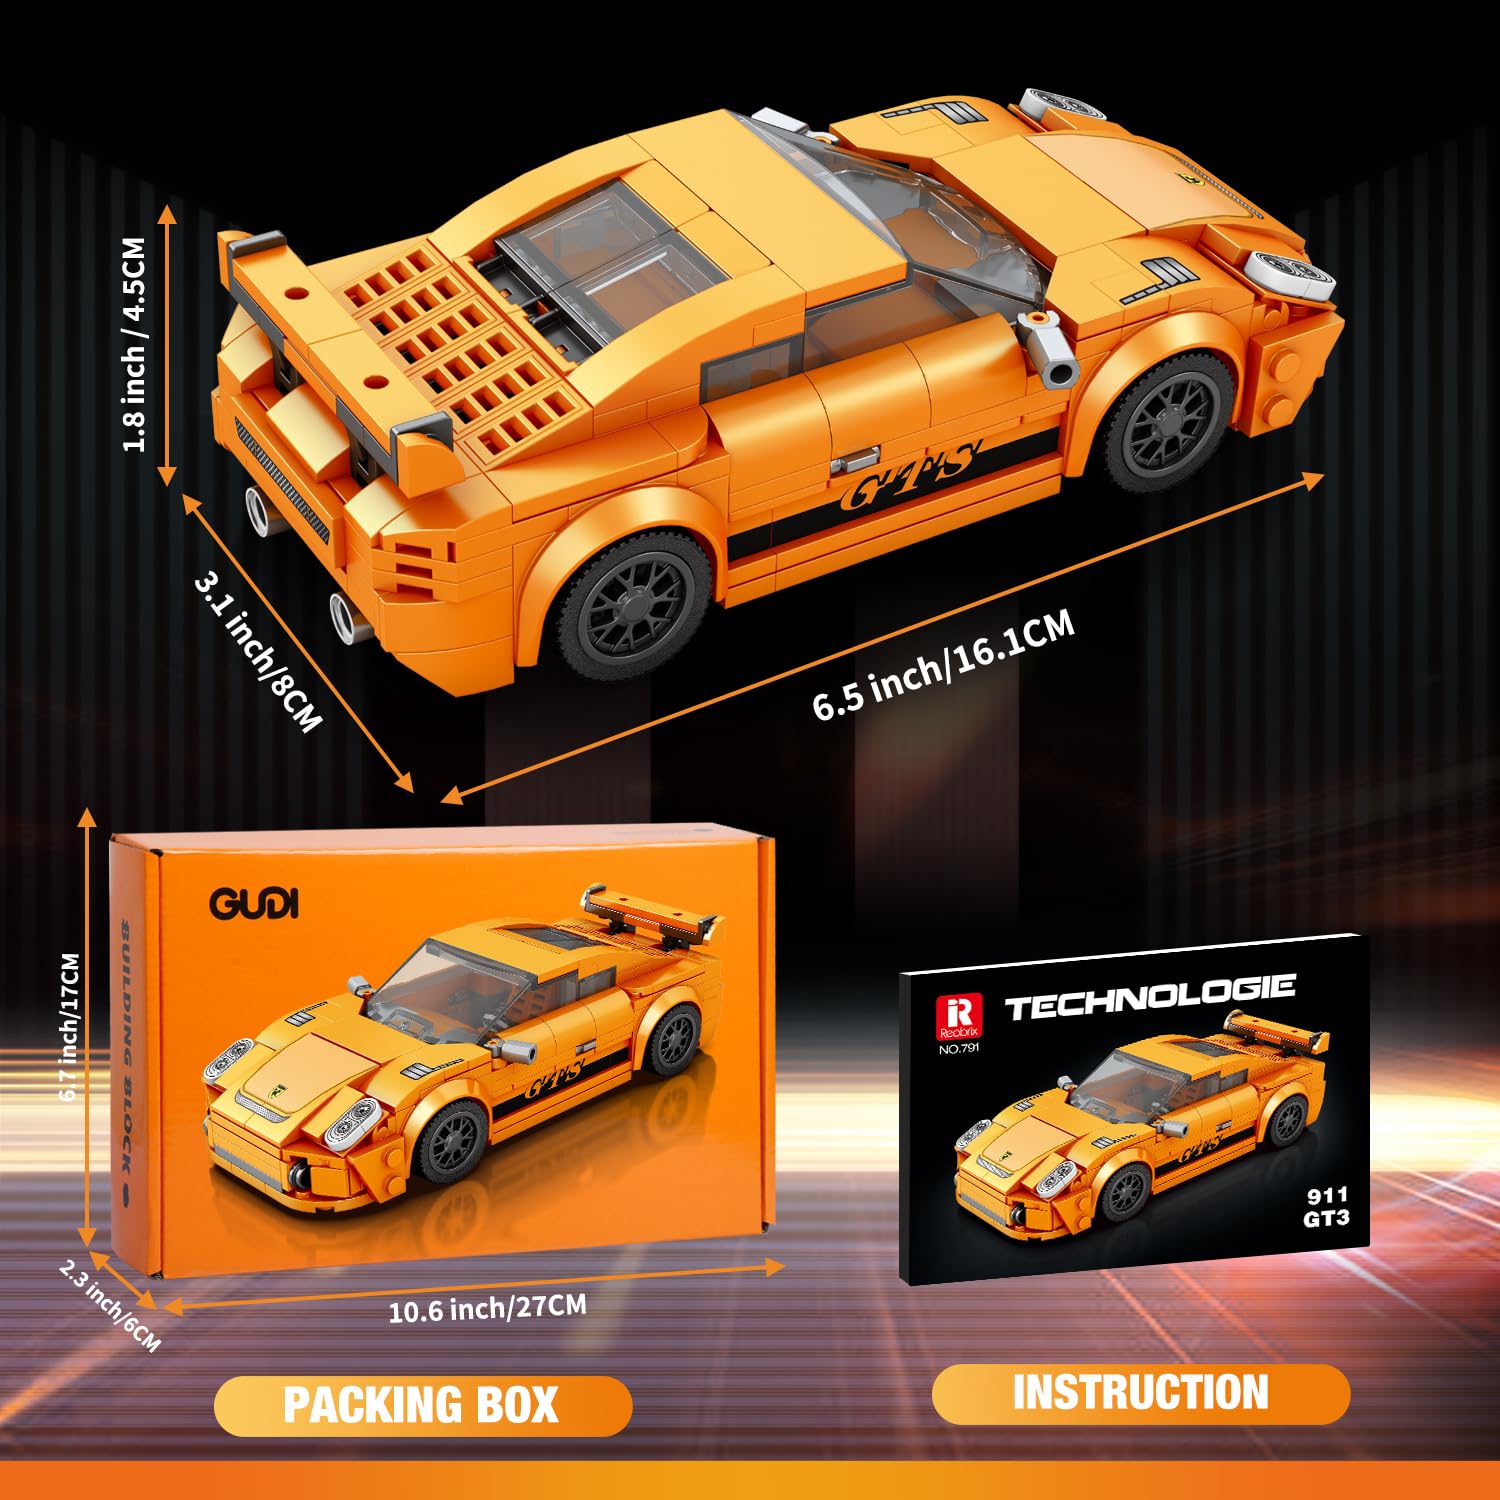 Sports Car Set Building Toy, Technique and Engineering Construction Toy for Kids Boys and Girls,Speed Champion Race Car A Great Gift for Car Lovers Gifts for Boys Age 3 4 5 6 7 8 9 10 11 12